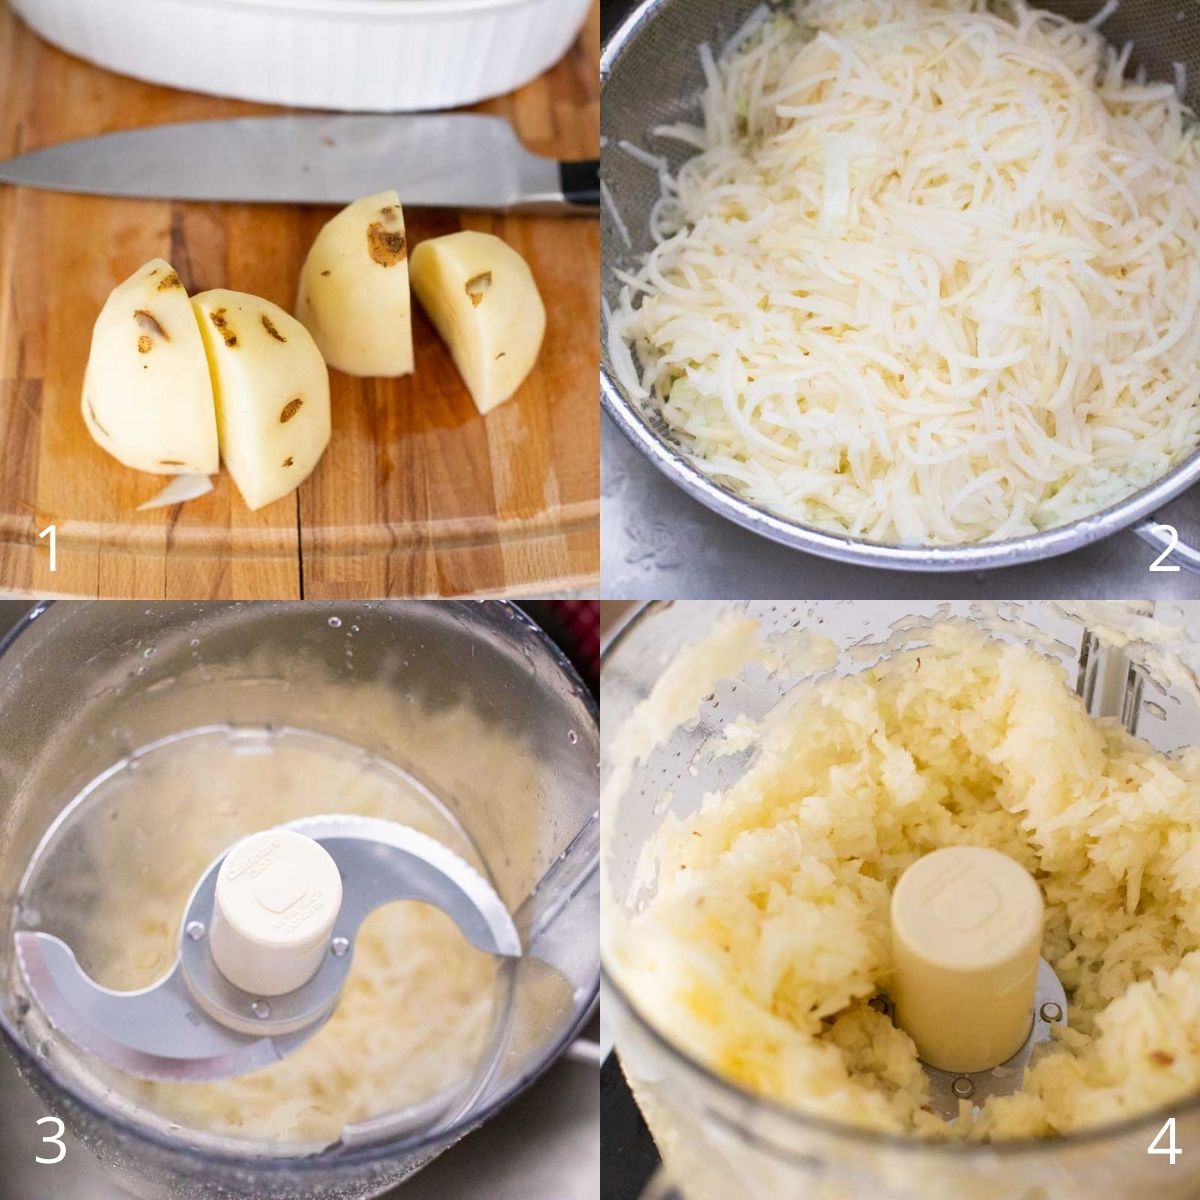 Step by step photos show how to cut and shred the fresh potatoes with a food processor for the potato latkes.